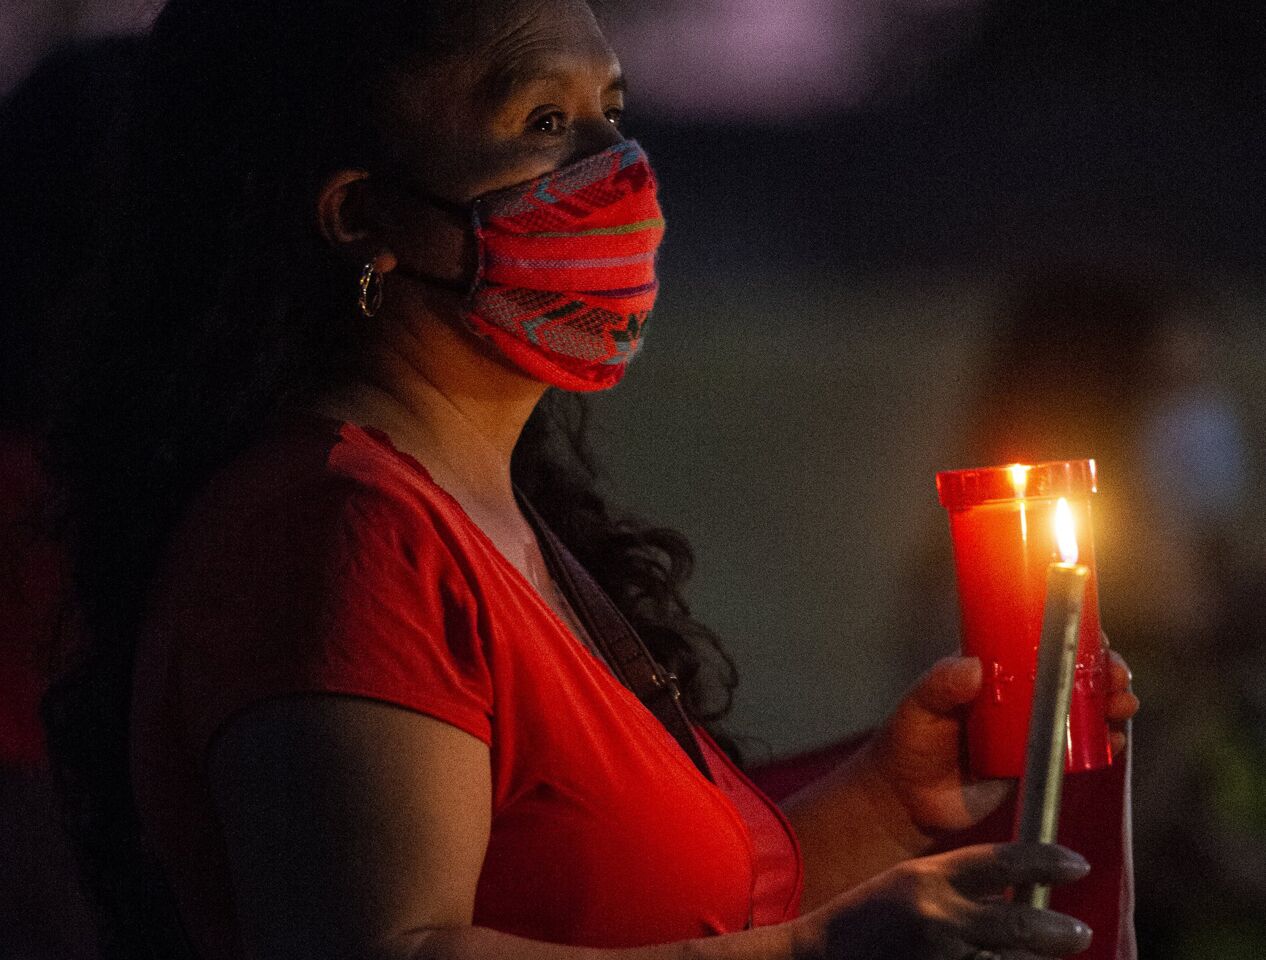 People gather for a community candlelight vigil Thursday in Livingston, Calif., to honor the eight people who died in a COVID-19 outbreak at Foster Farms' Livingston plant.